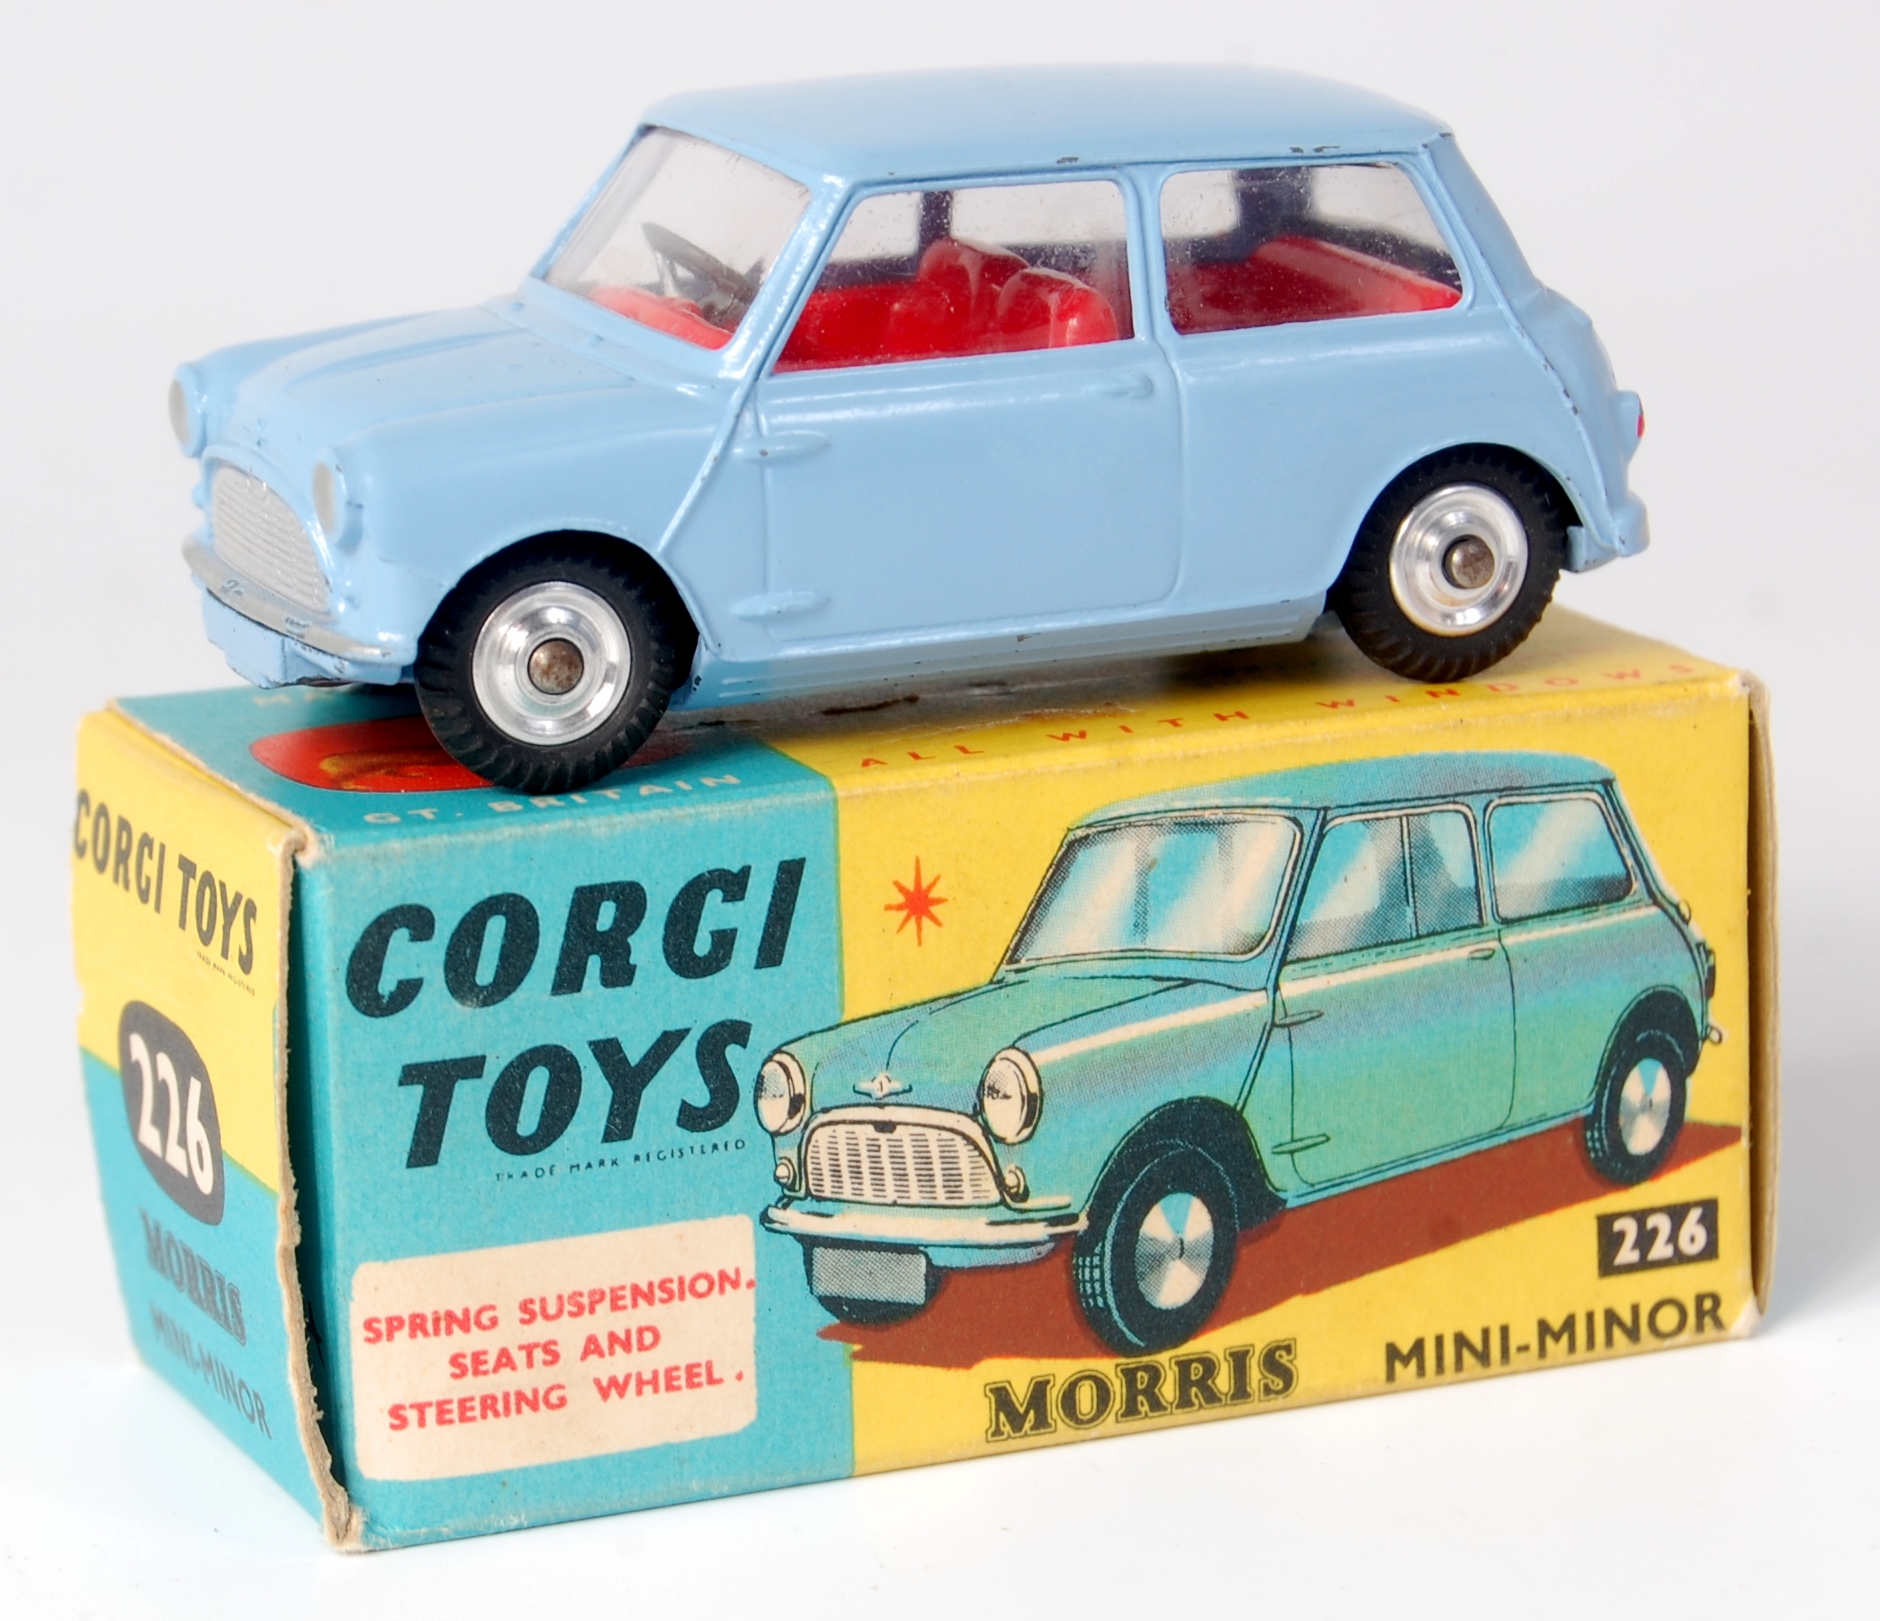 Corgi Toys, 226 Morris Mini Minor, pale blue body with red interior, silver detailing with shaped